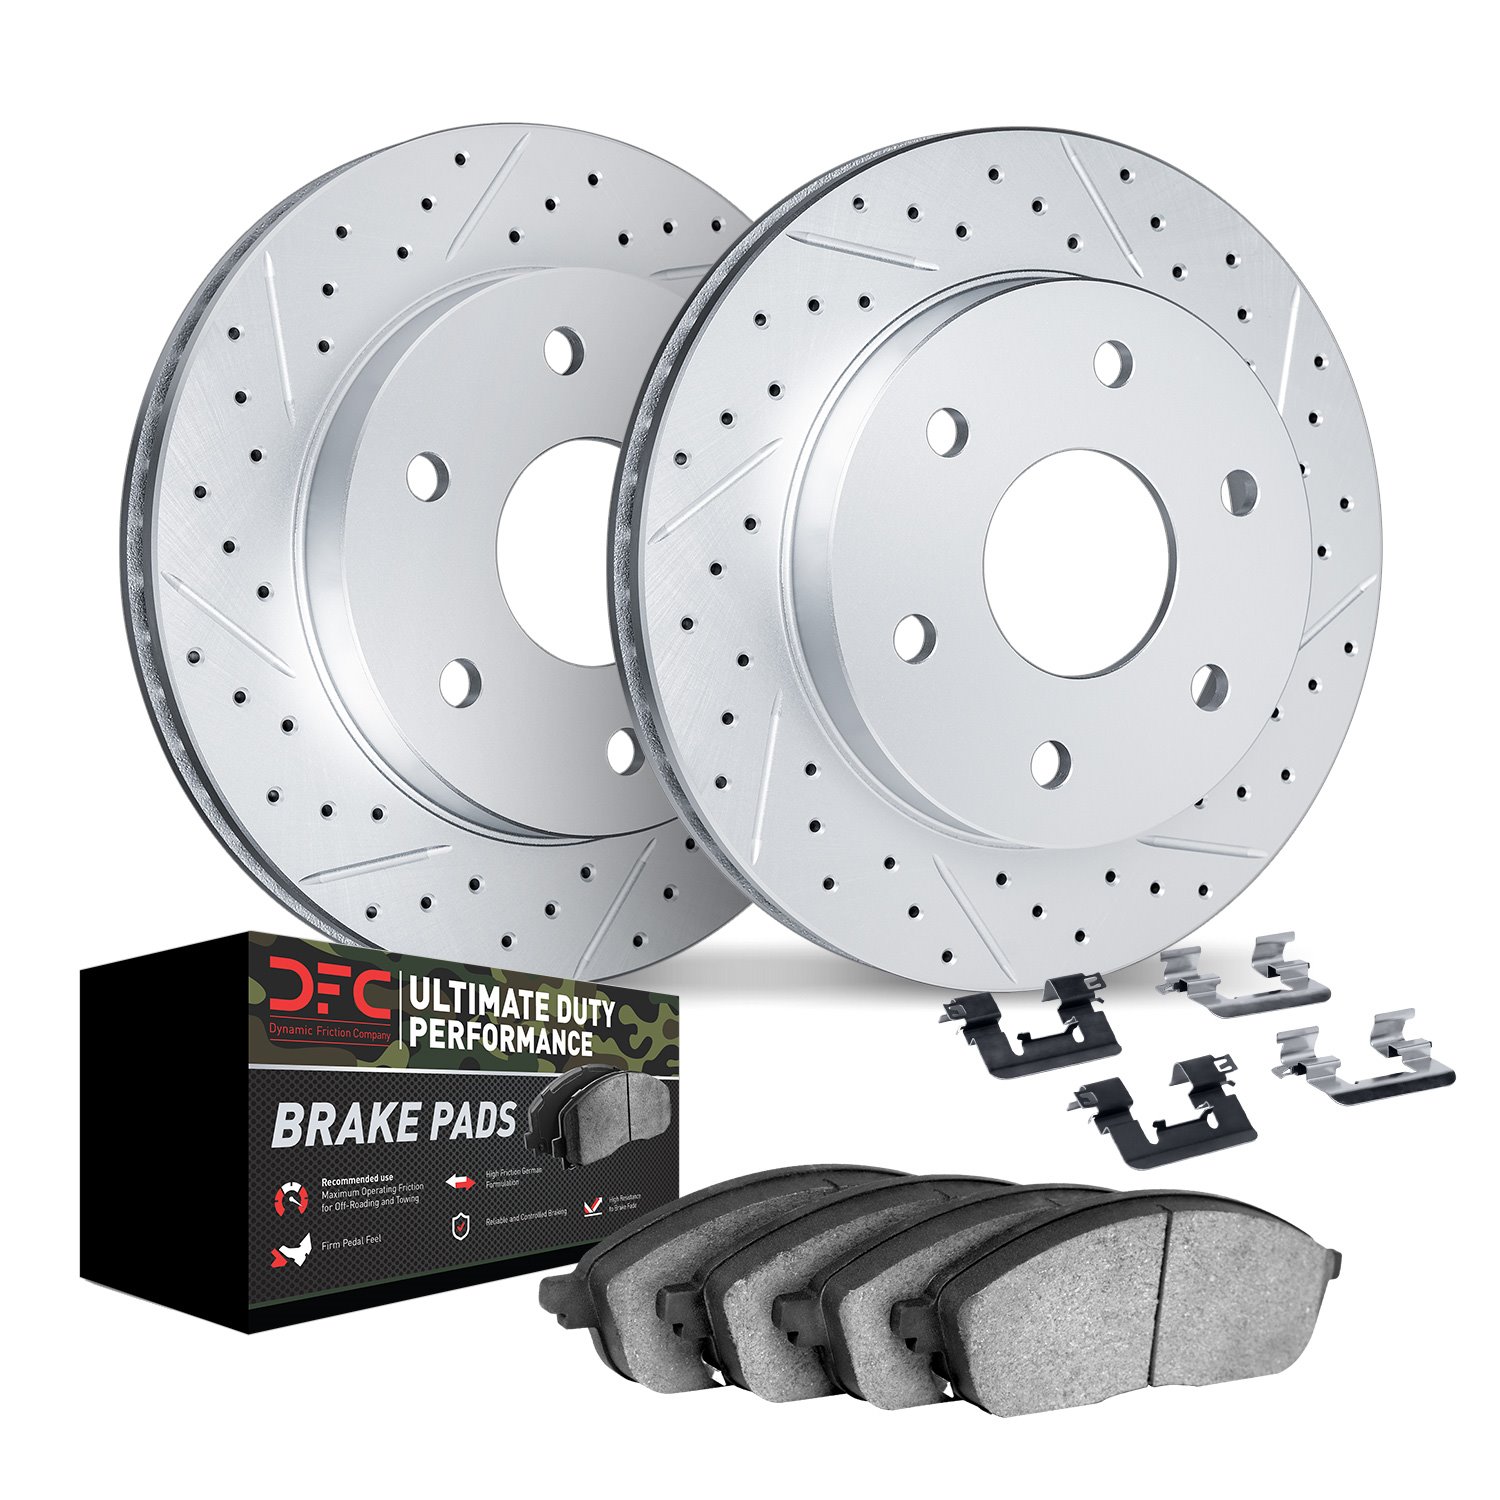 2412-54063 Geoperformance Drilled/Slotted Brake Rotors with Ultimate-Duty Brake Pads Kit & Hardware, 2010-2021 Ford/Lincoln/Merc